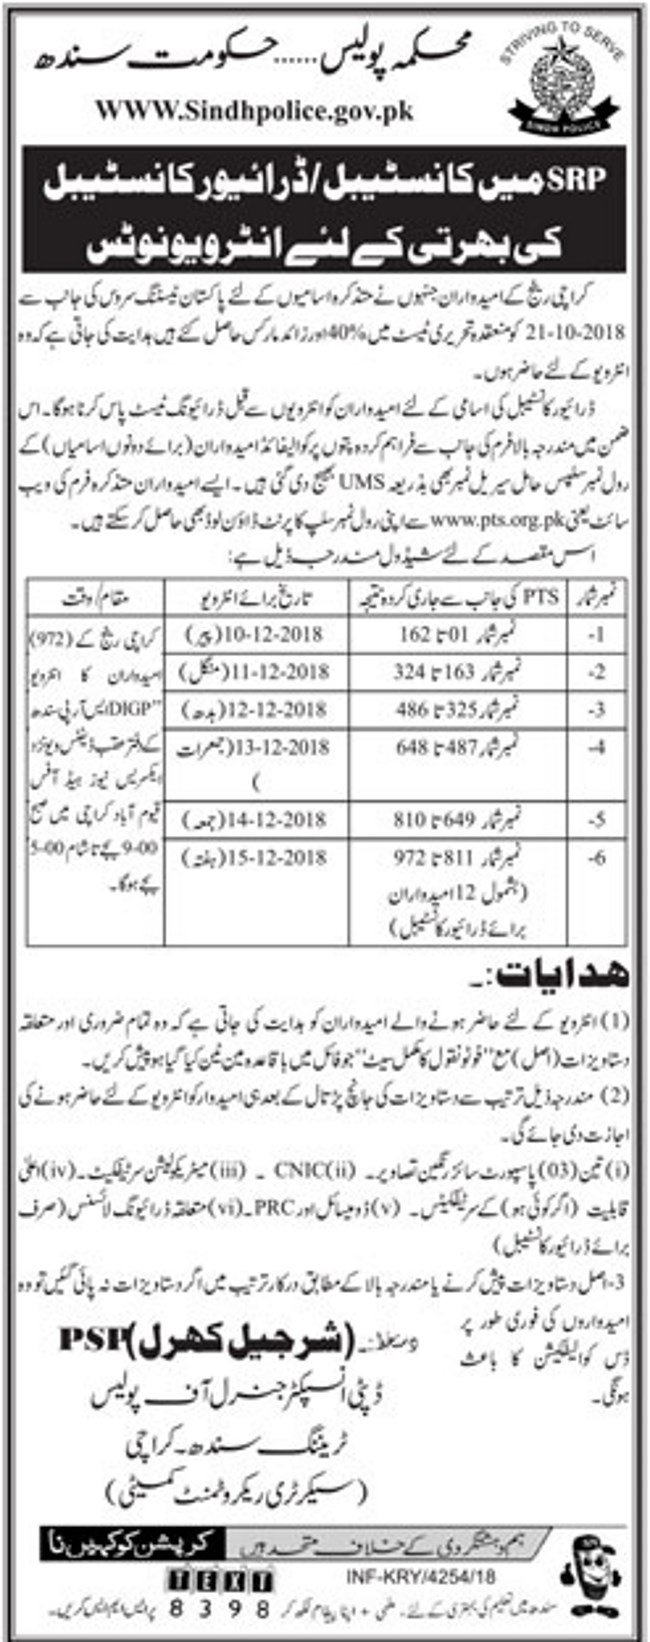 Research & Material Testing Institute Punjab Jobs 2019 for 8+ Computer Operator, Asst Librarian, Khateeb & Other Posts